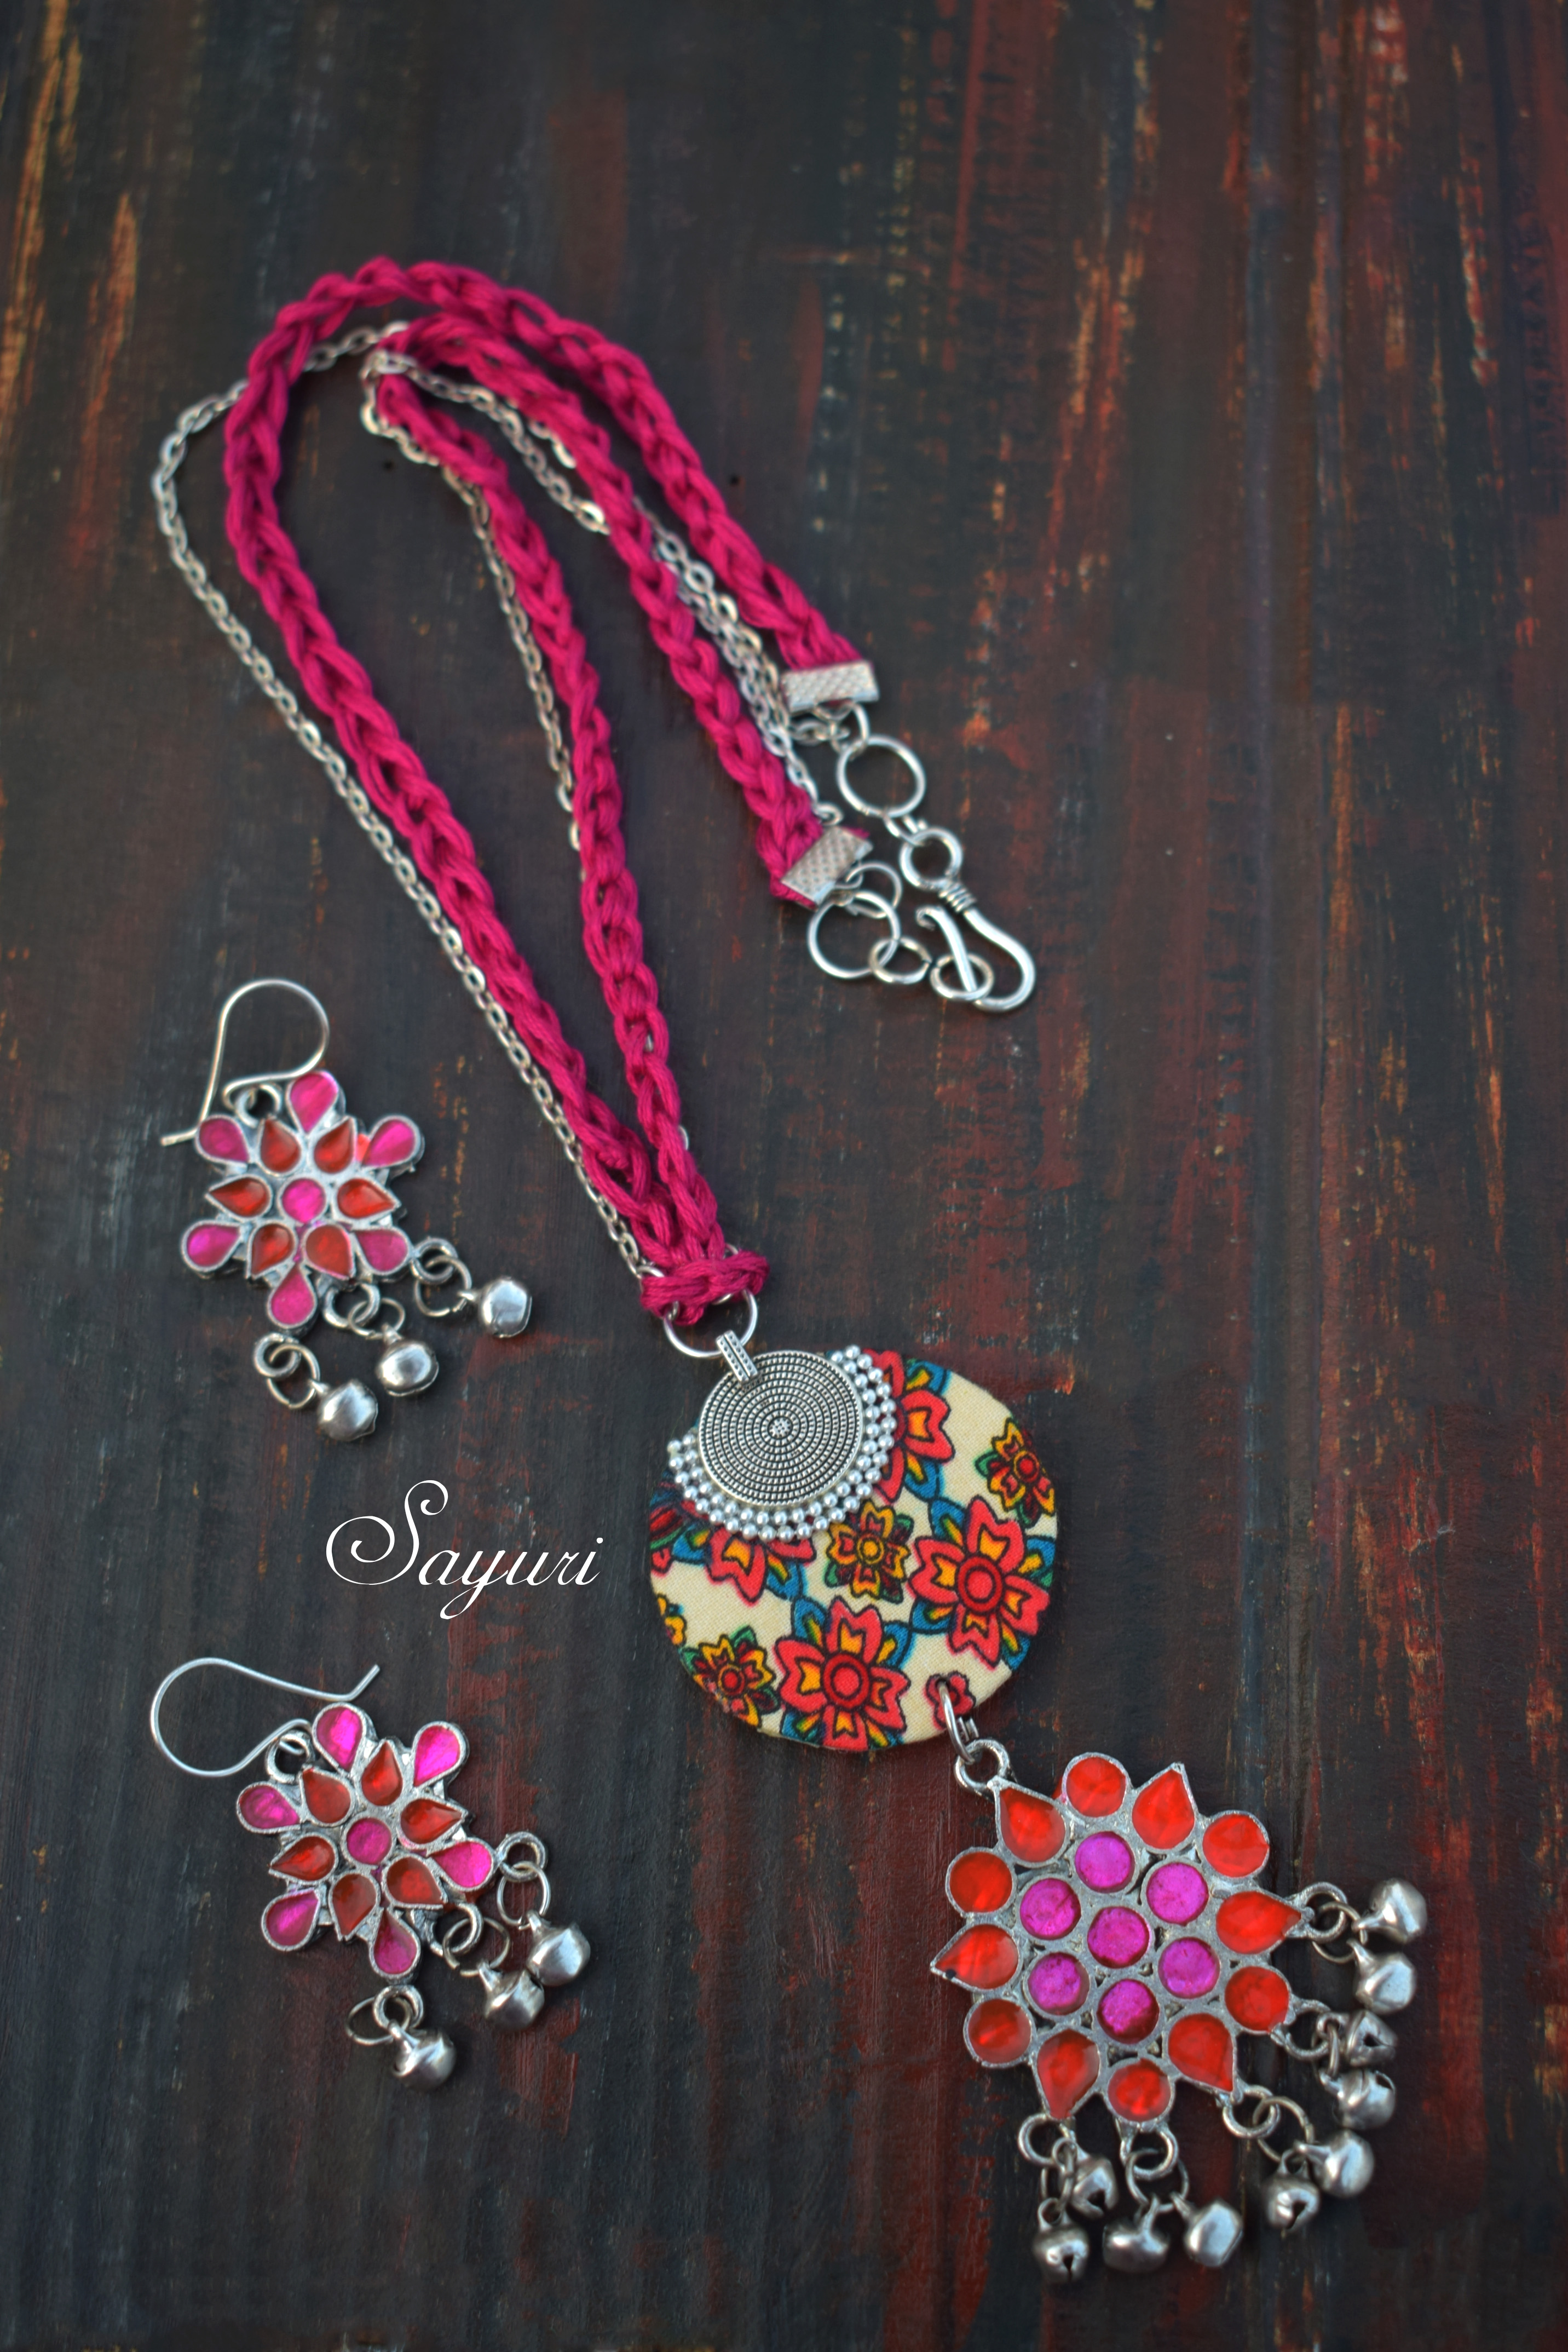 Pendant and earrings sets of fabric jewellery